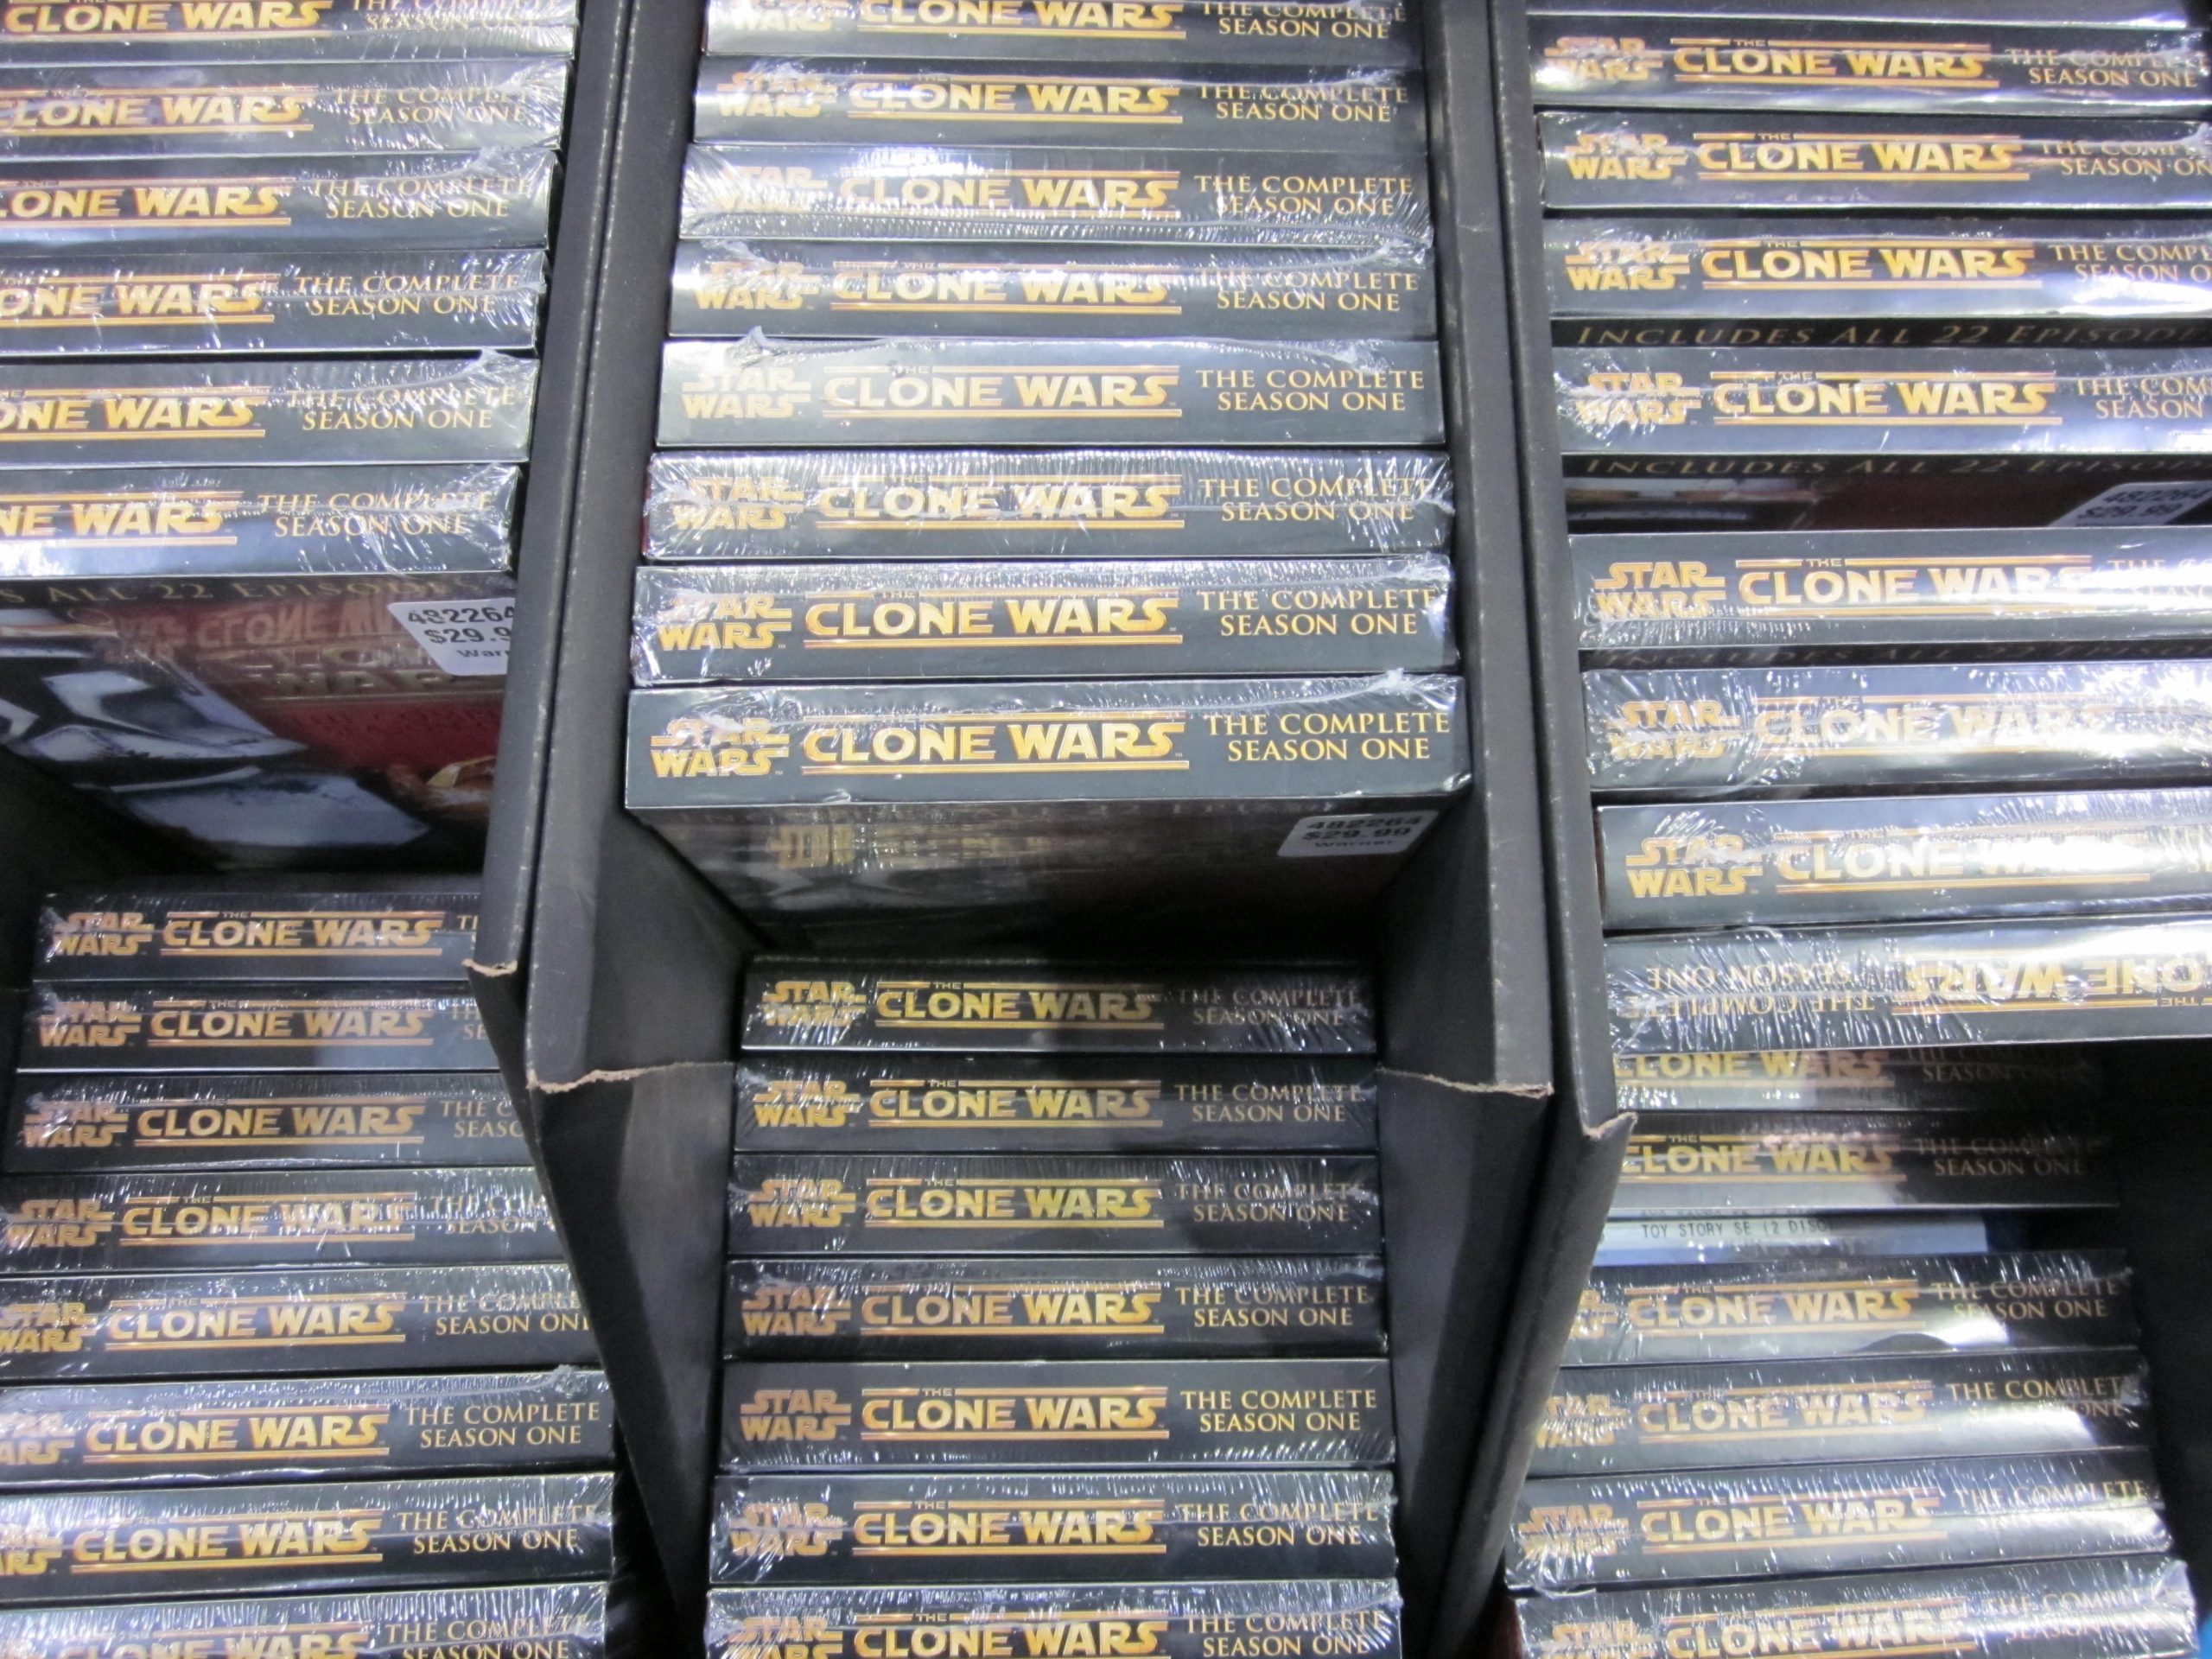 What is the difference between DVD box set duplication and Replication?